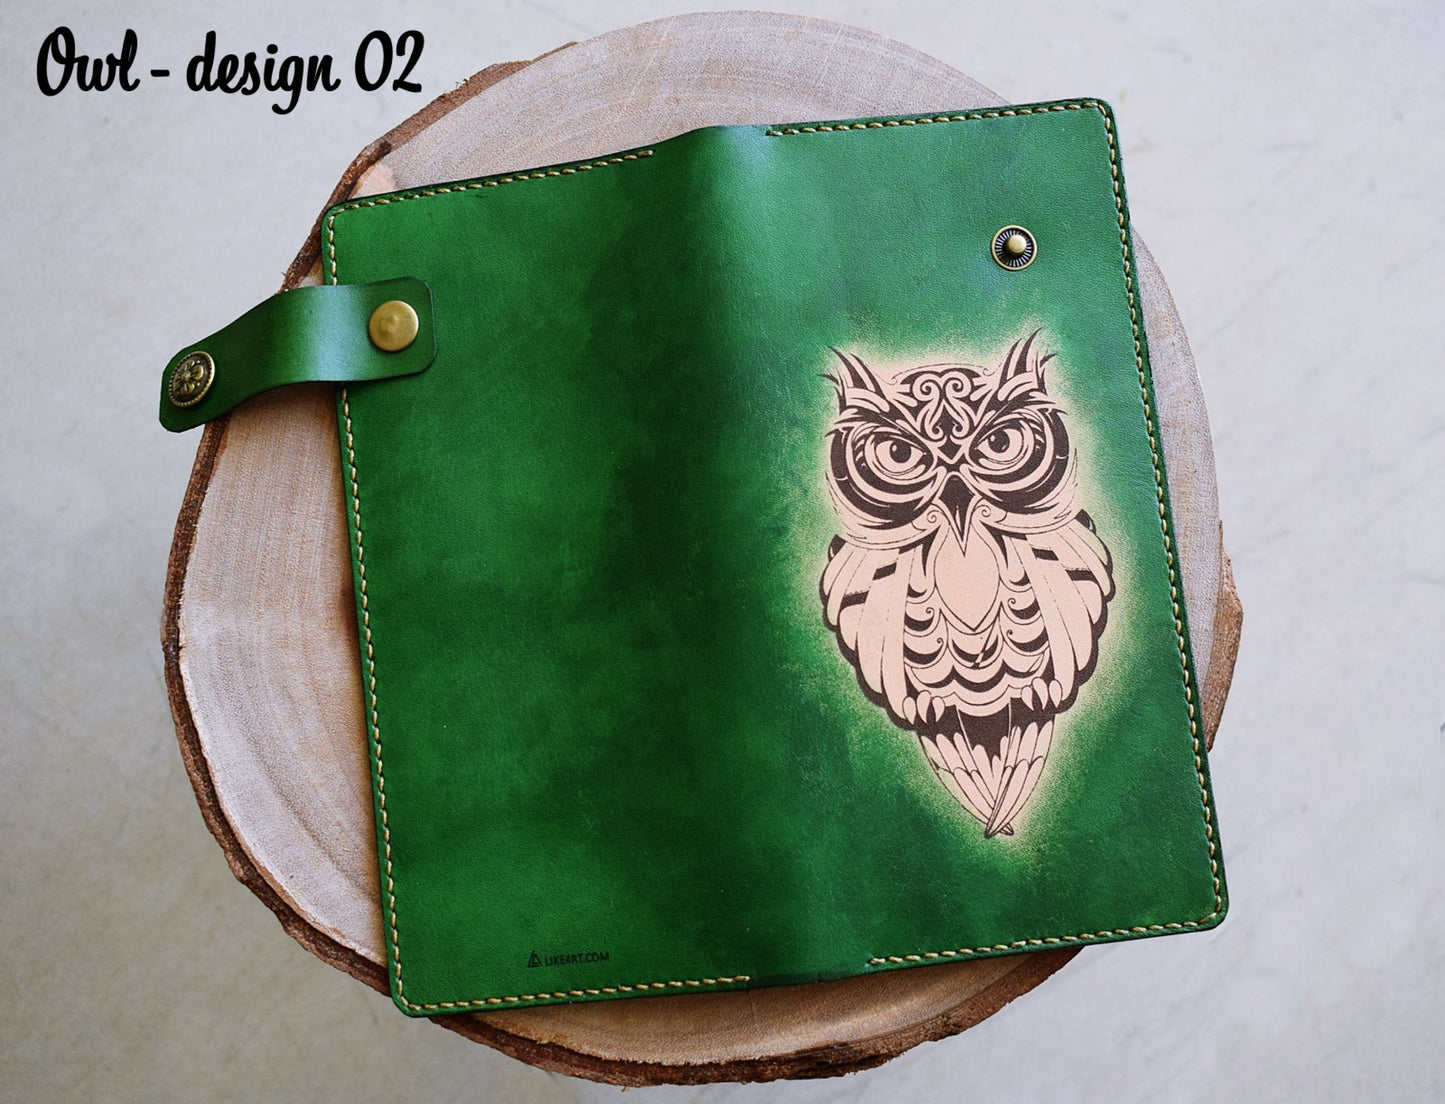 Personalized leather handmade women's Owl long wallet, gifts for her, Mothers Day anniversary gift